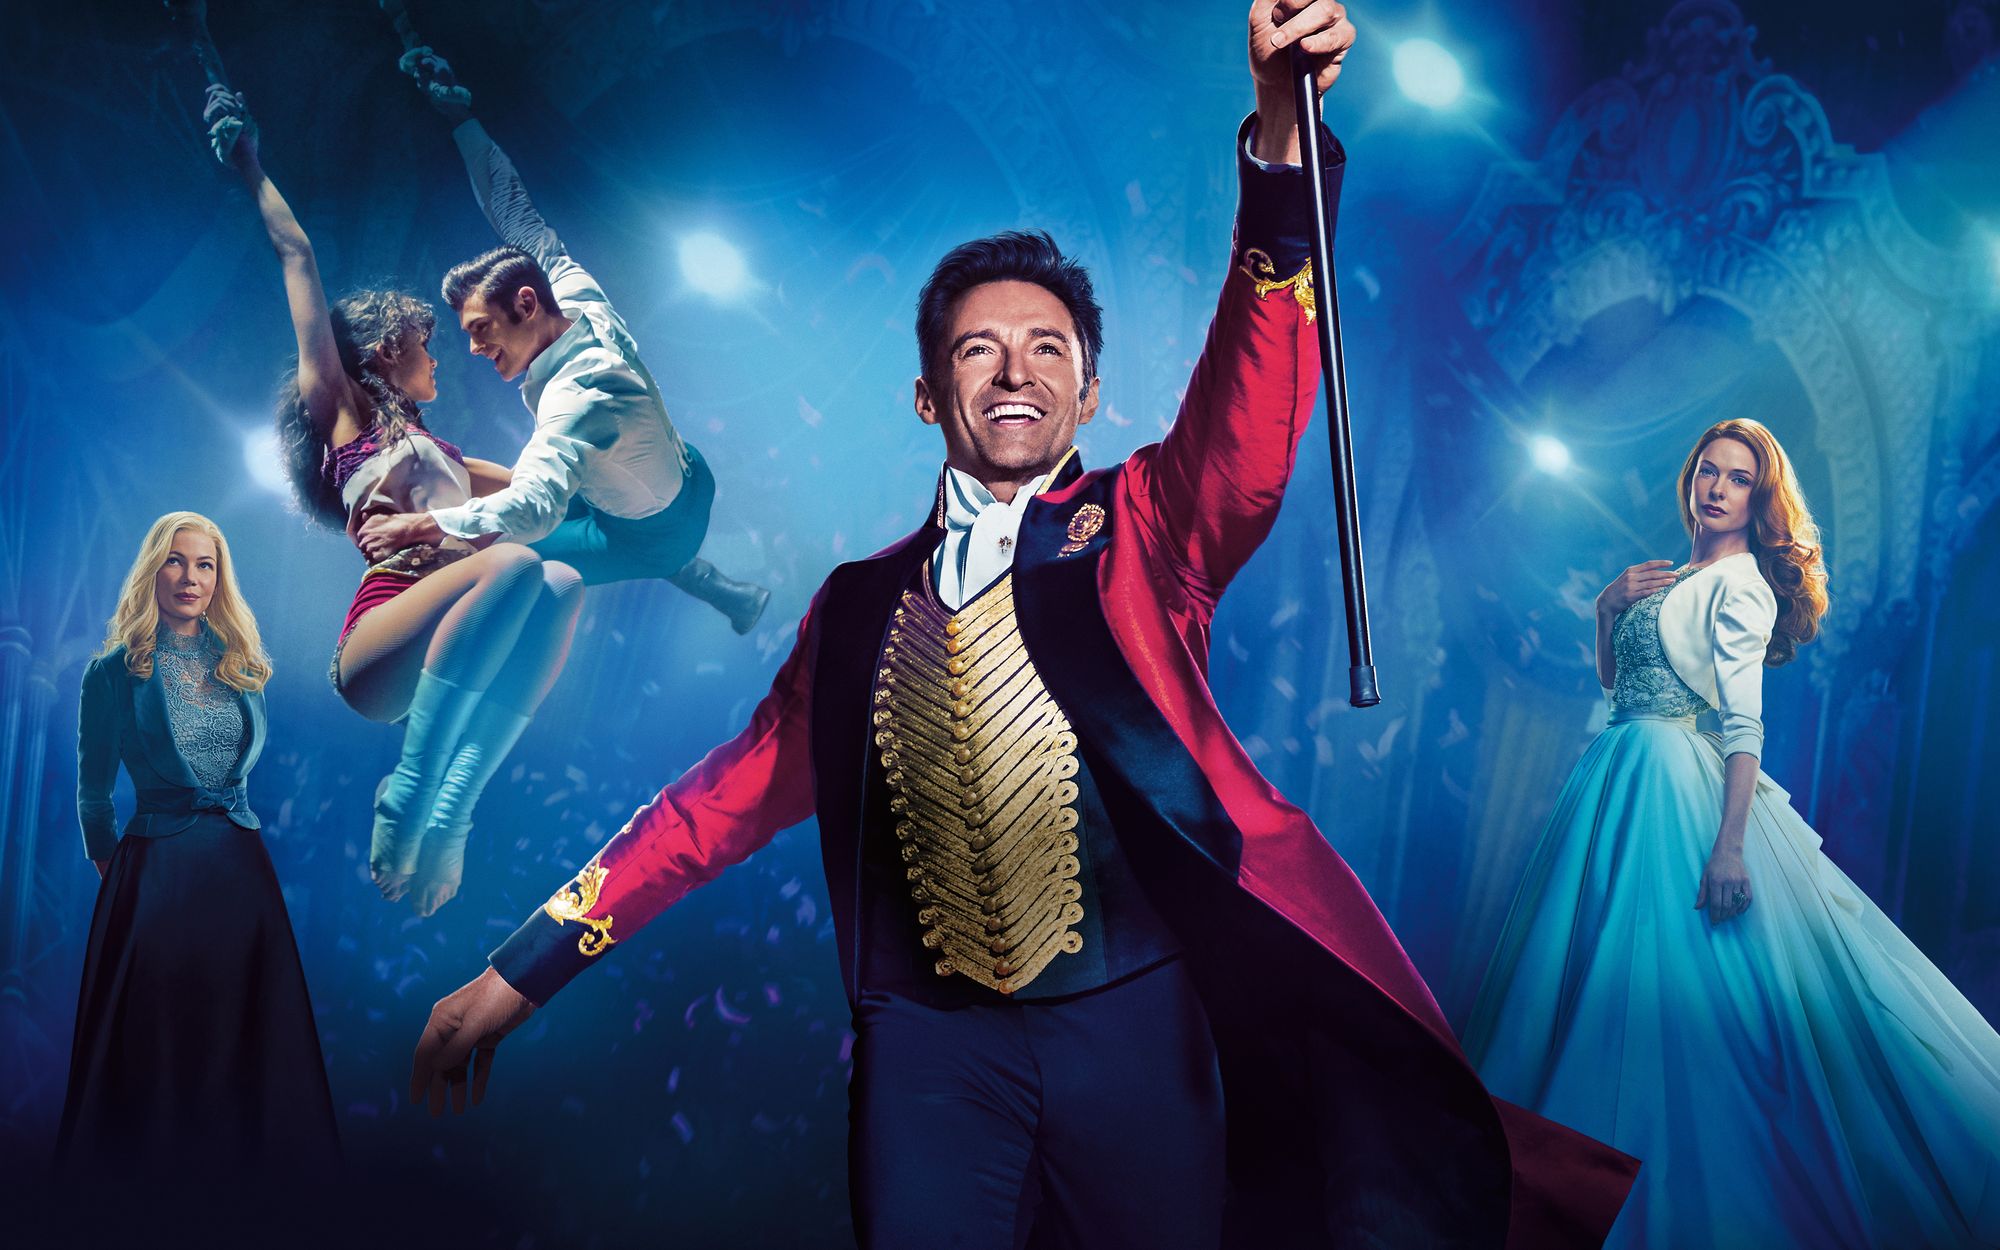 How to Watch The Greatest Showman on Netflix - Top 3 VPN Alternatives